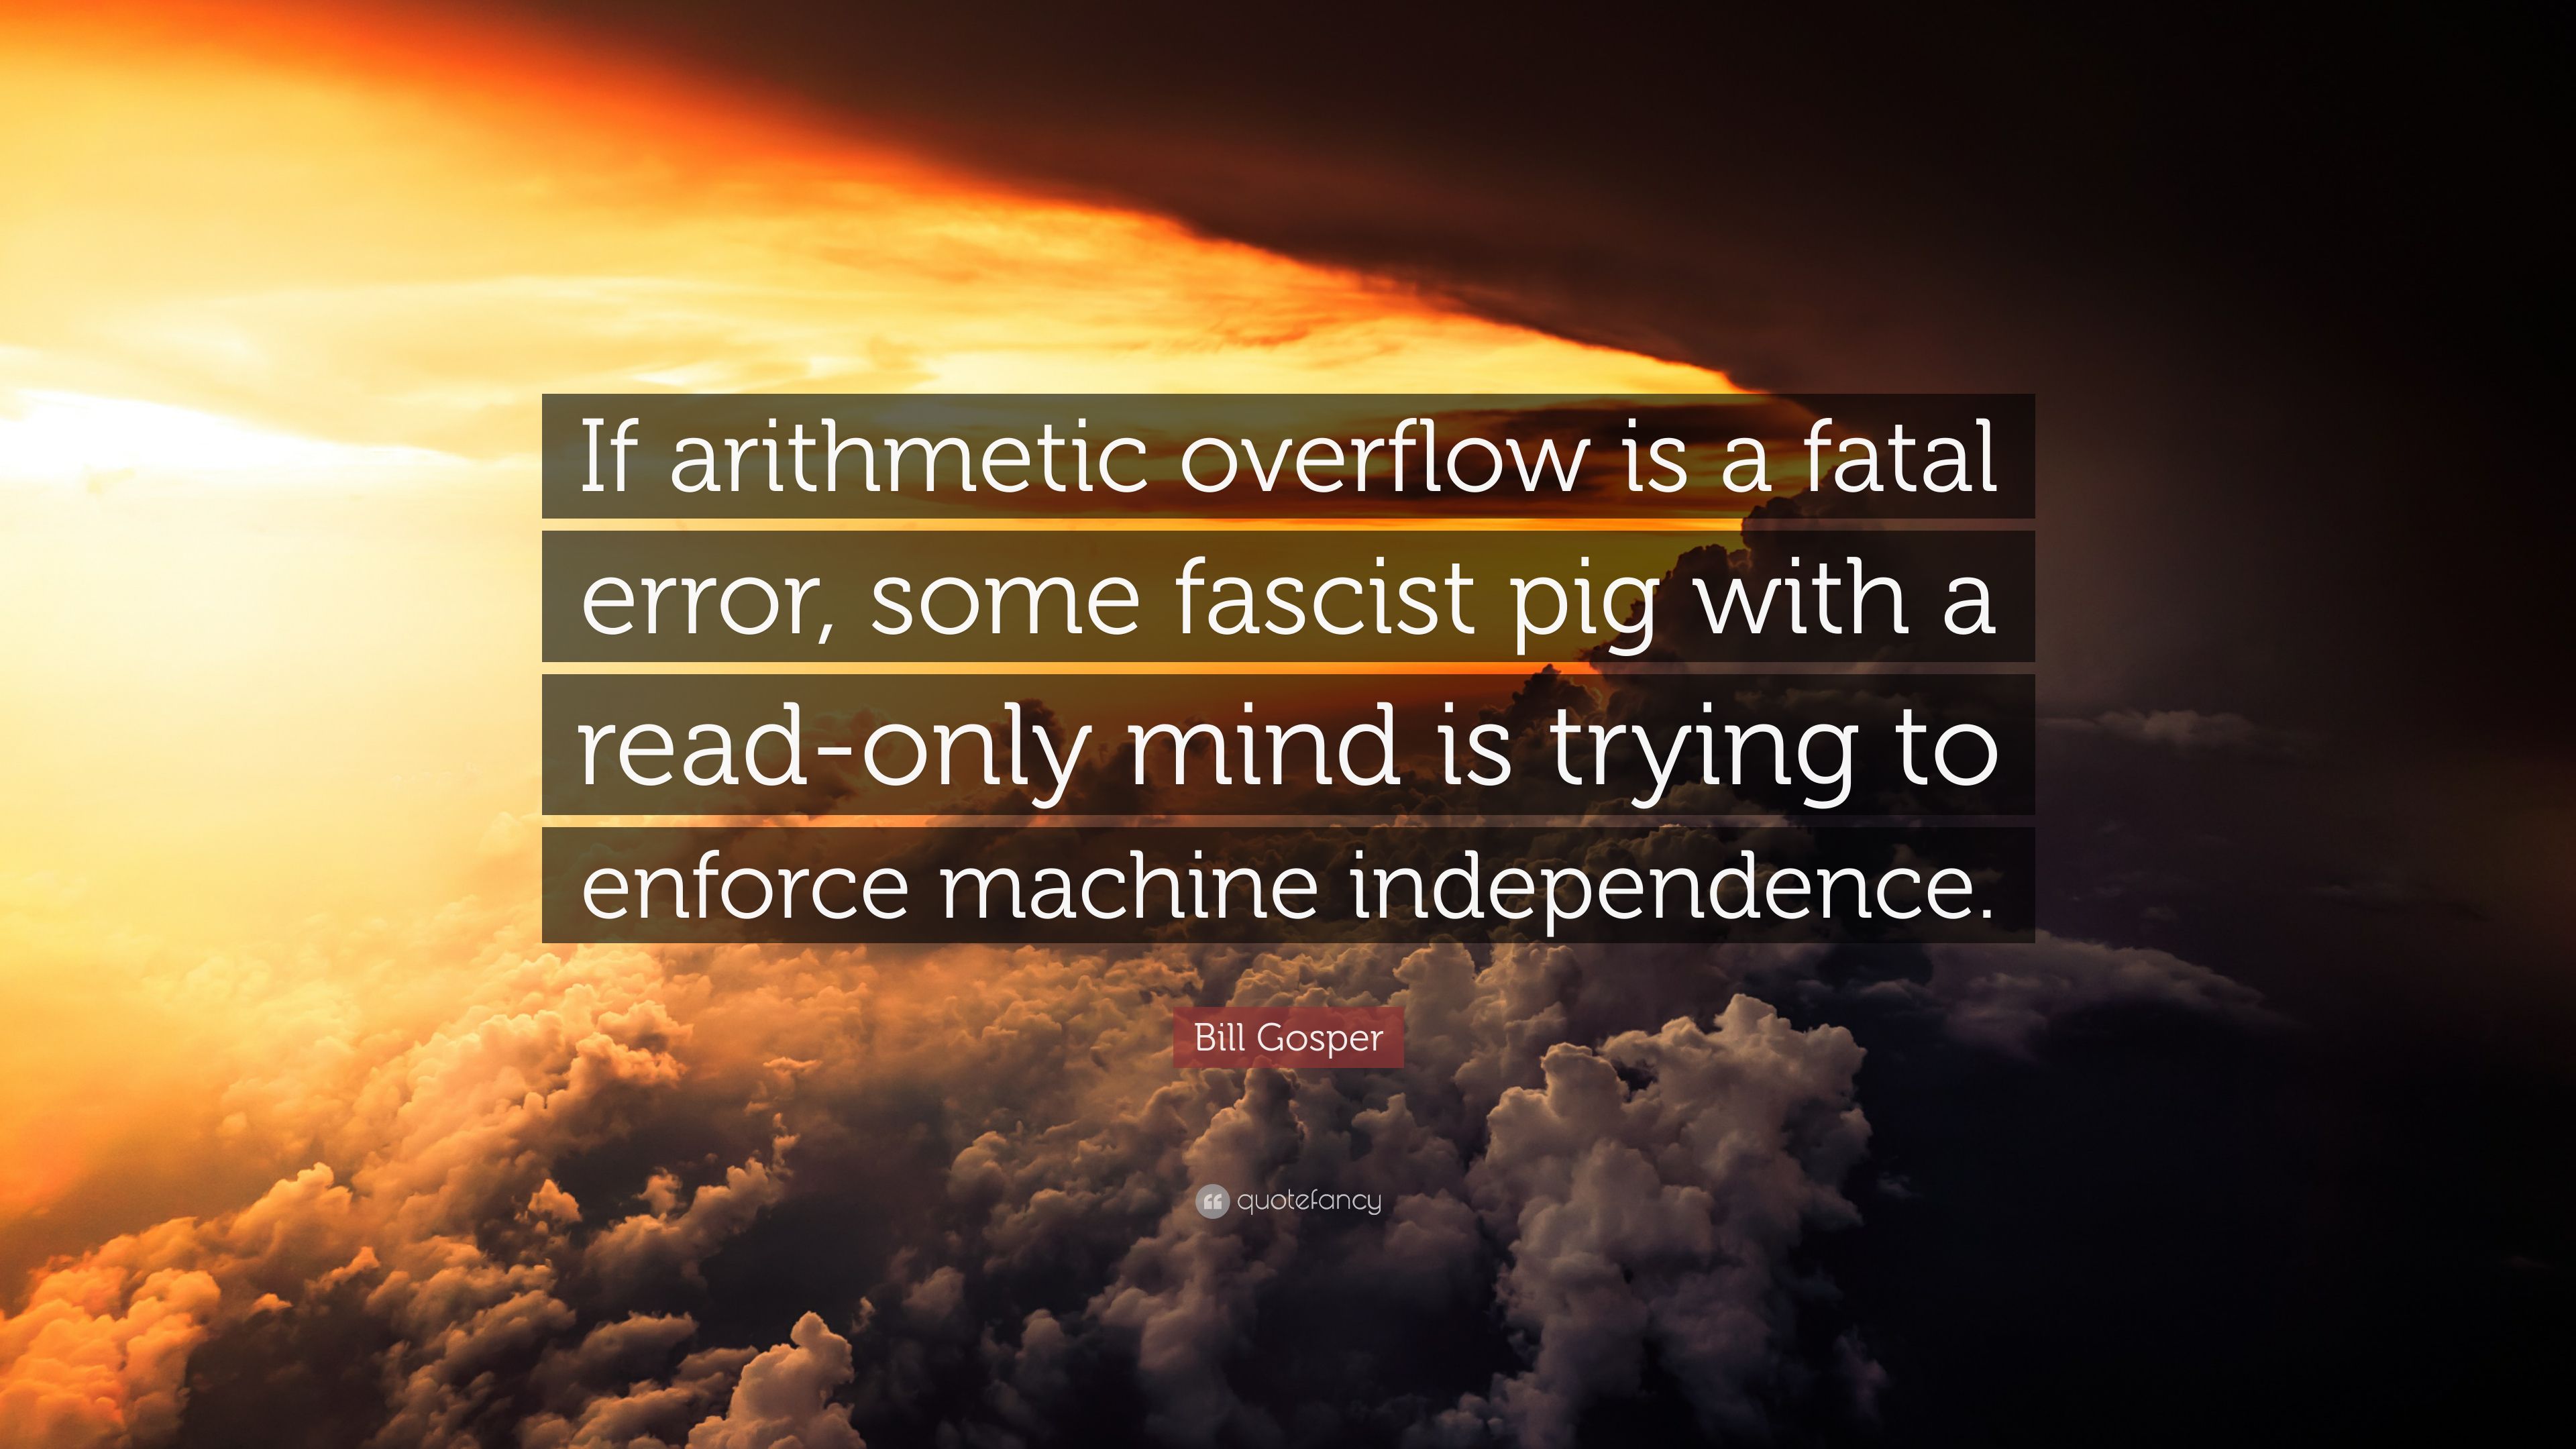 Bill Gosper Quote: “If arithmetic overflow is a fatal error, some